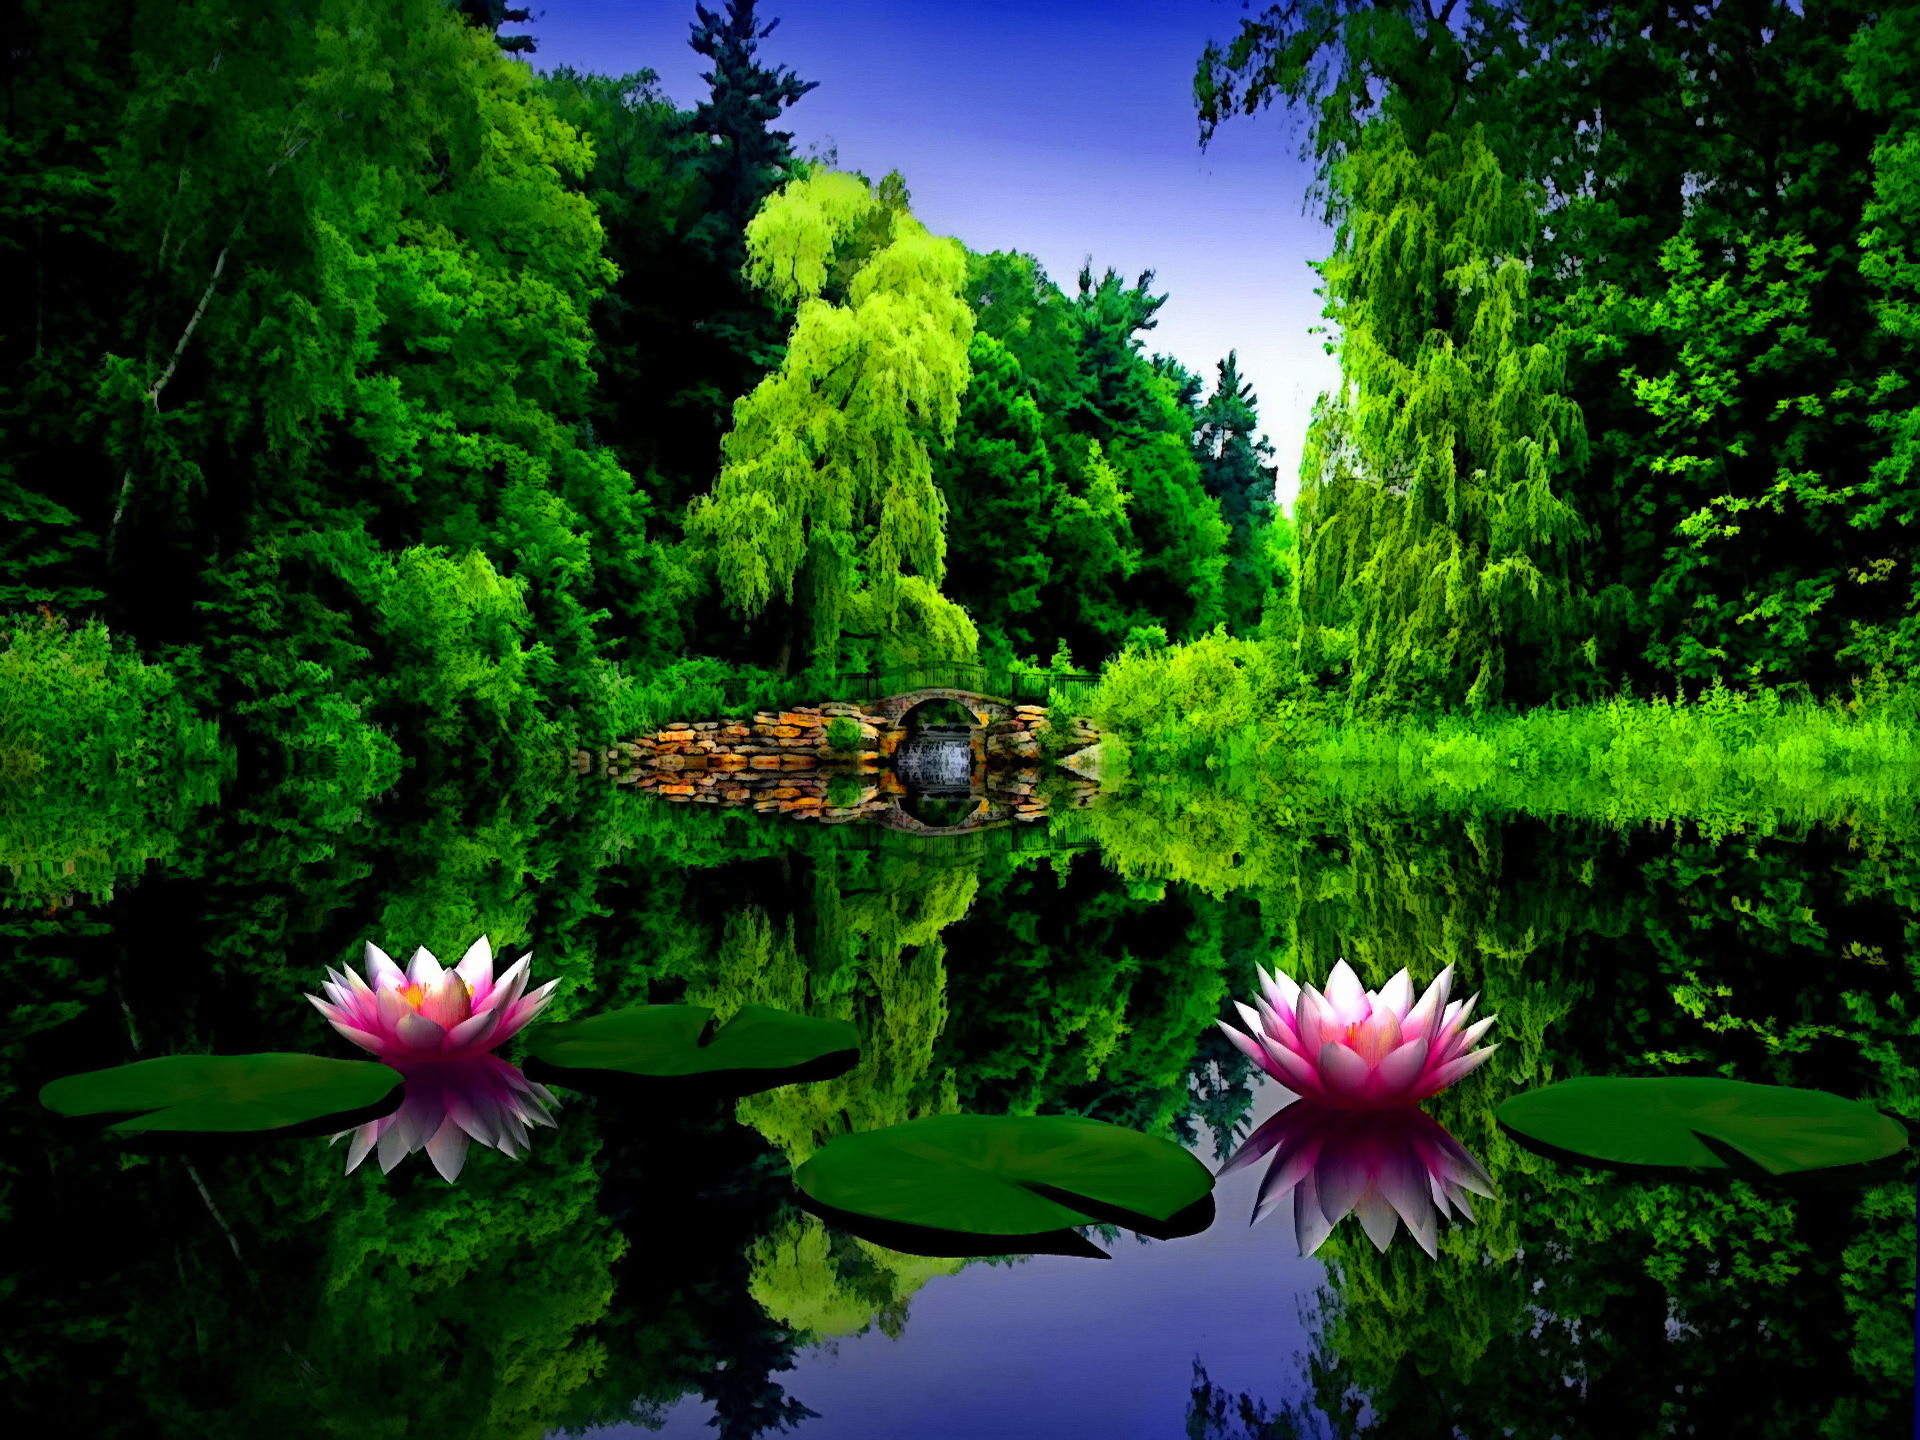 lily pad, reflection, park, tree, lotus, spring, pond, photography, bridge, green, water lily